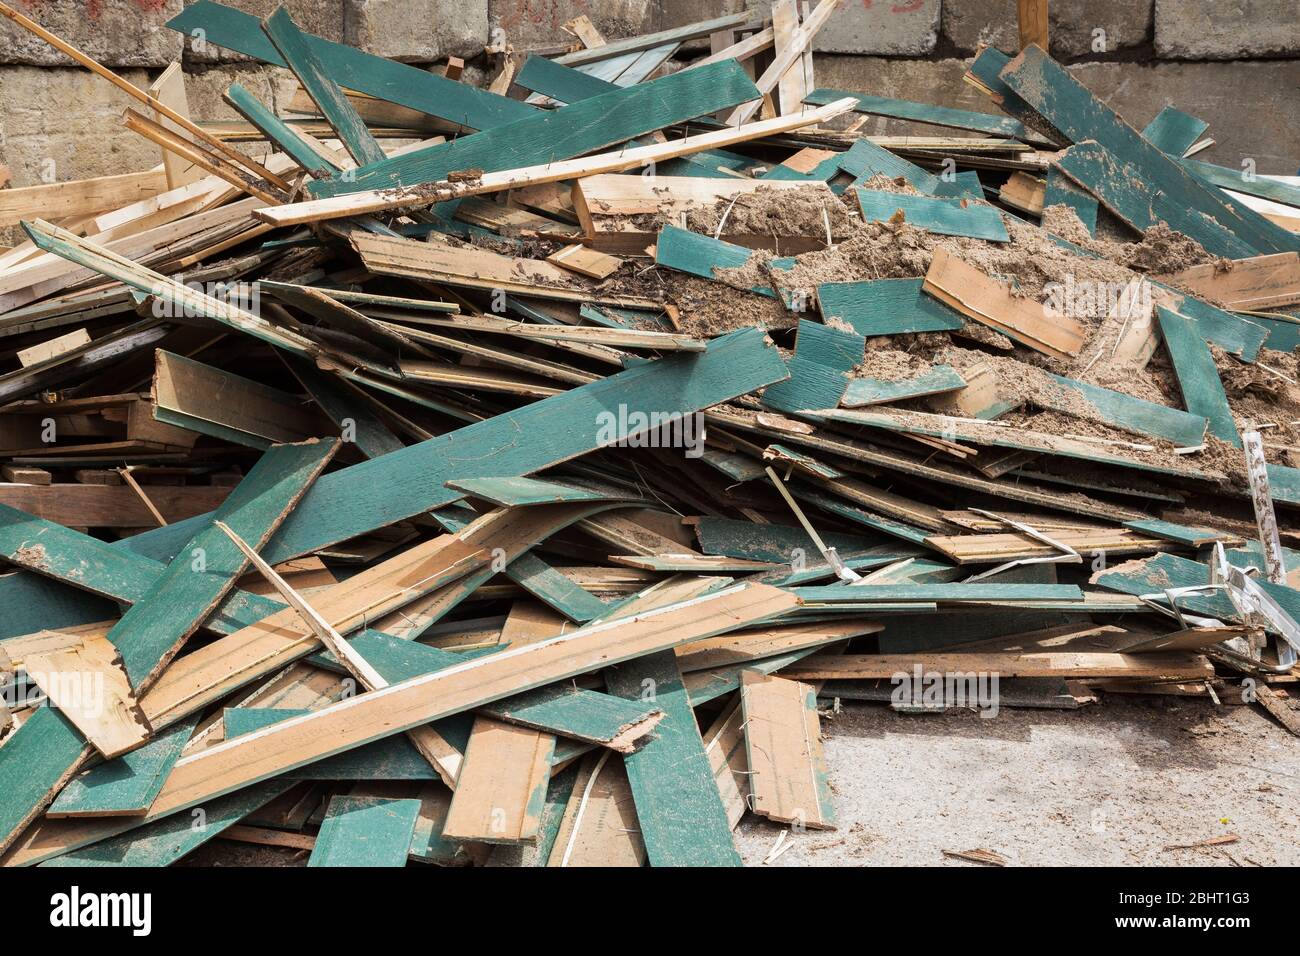 Pile of discarded green wooden planks in industrial outdoor trash bin Stock Photo